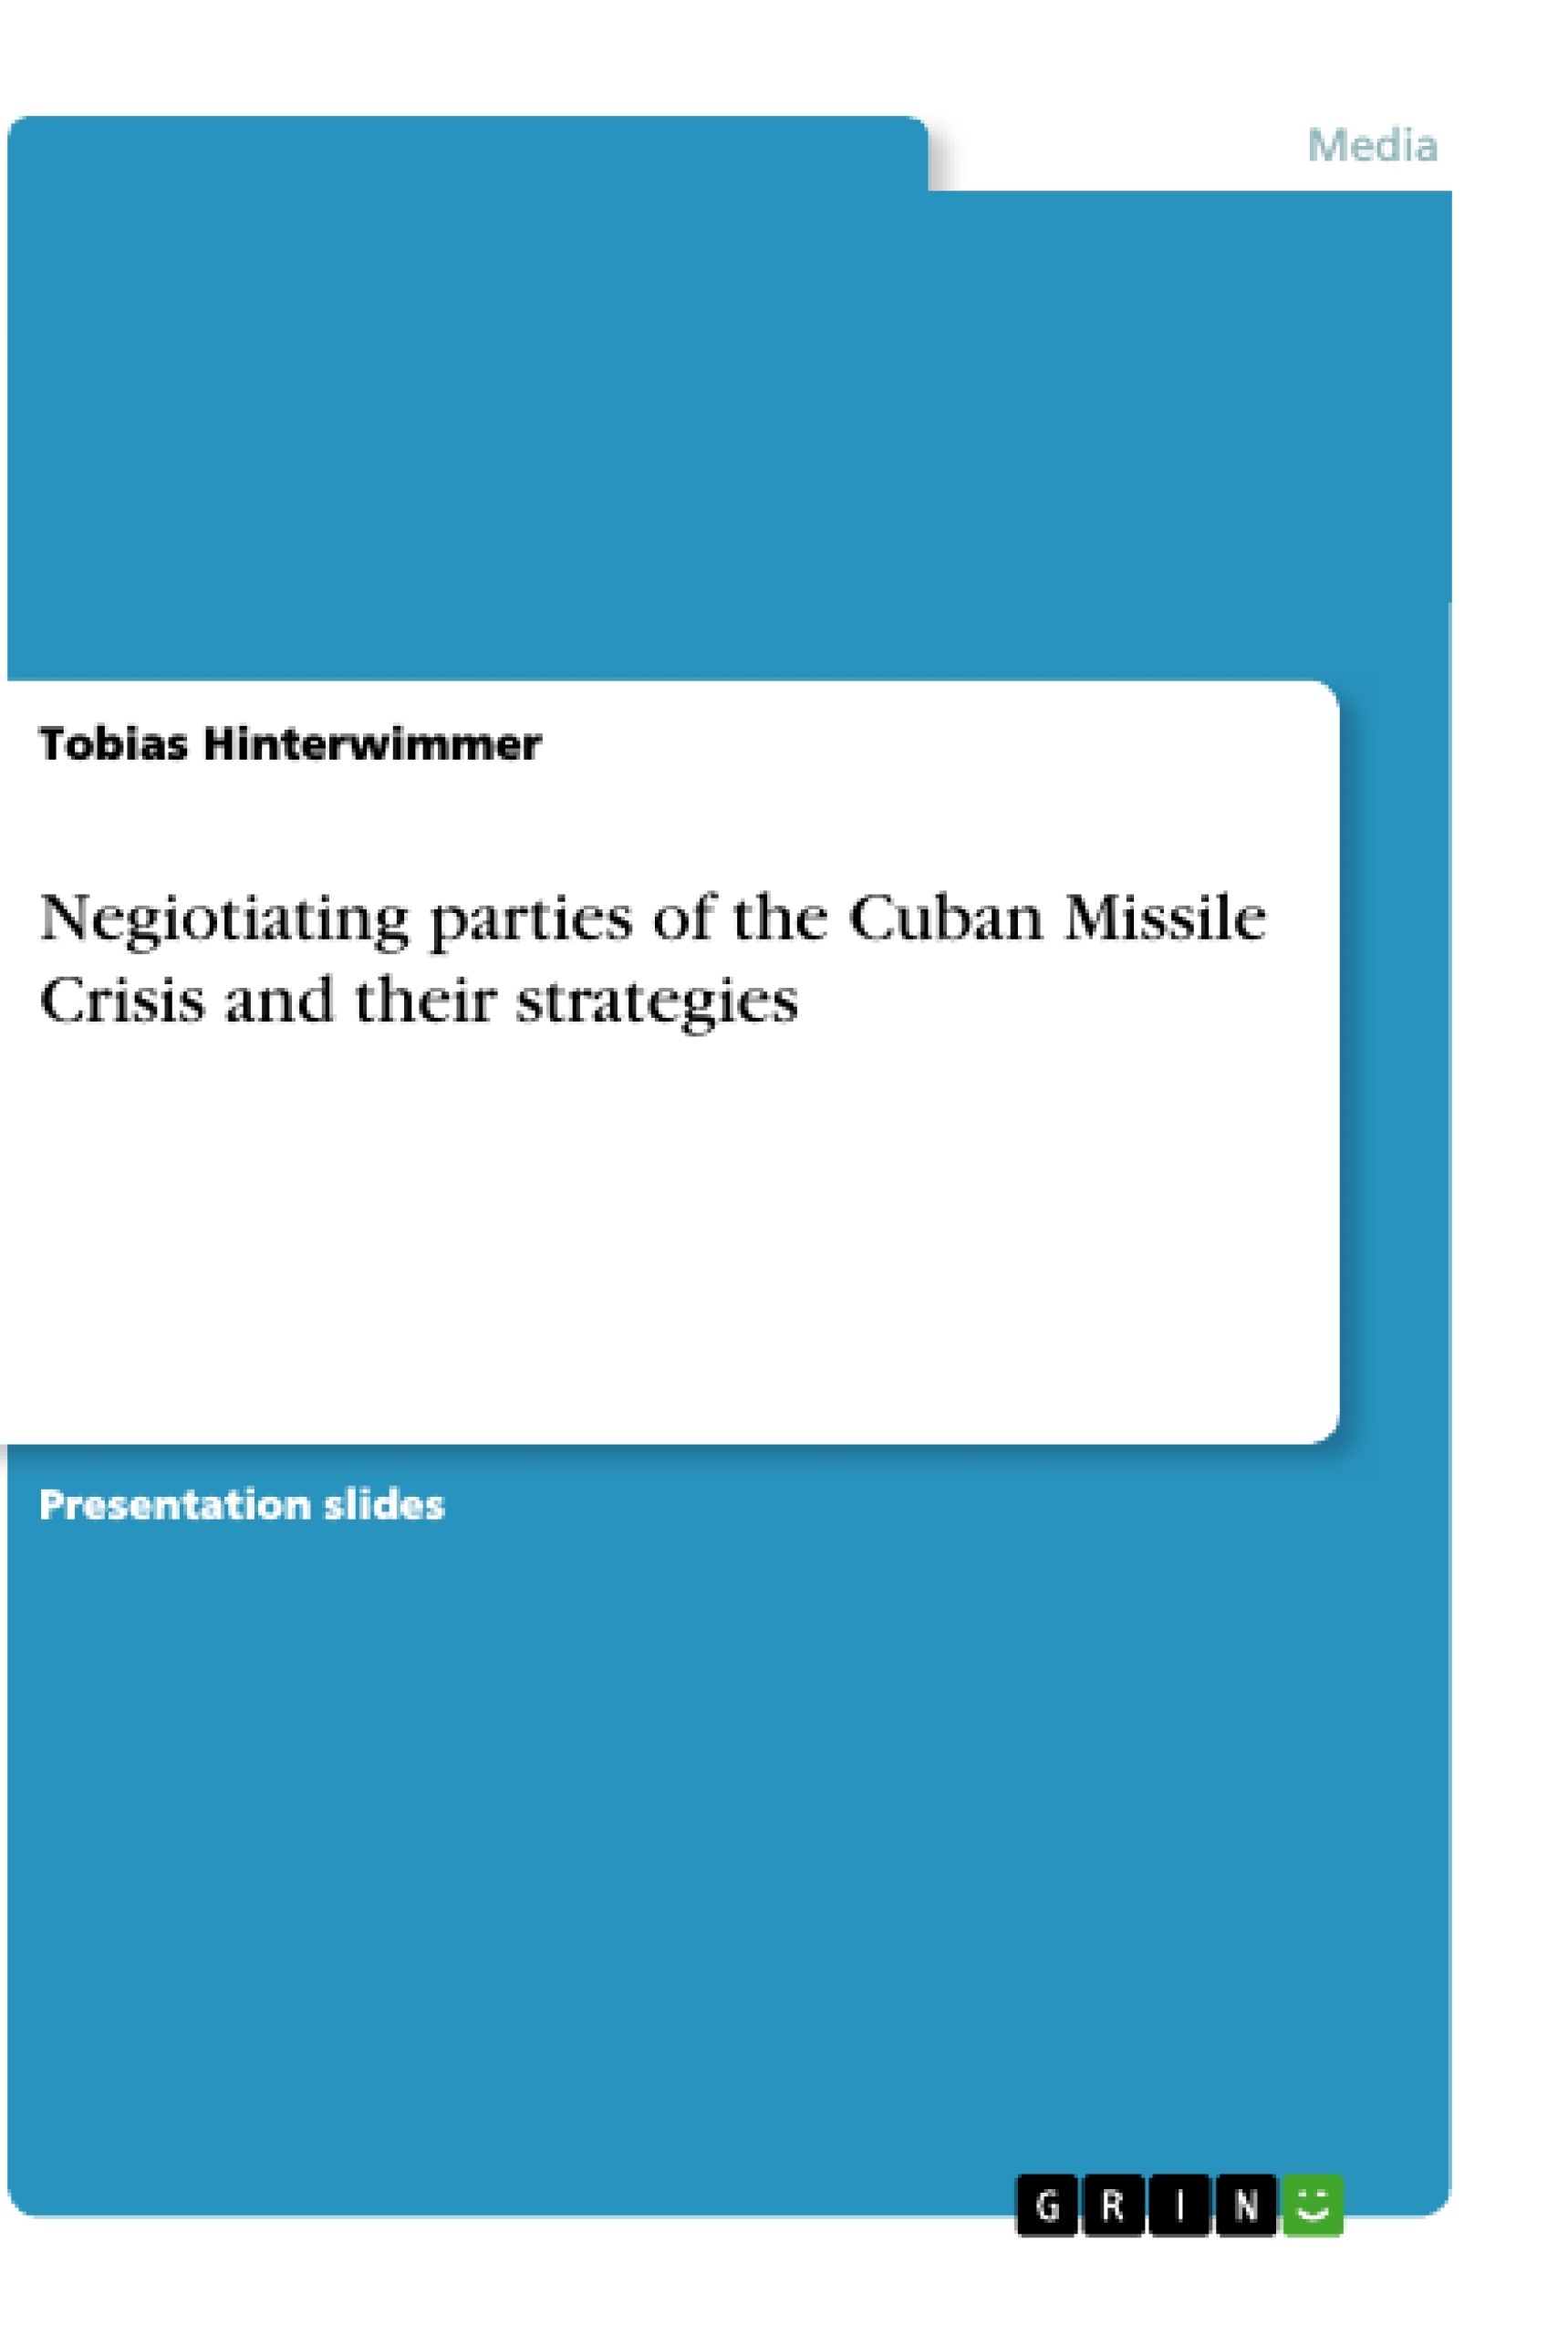 Title: Negiotiating parties of the Cuban Missile Crisis and their strategies